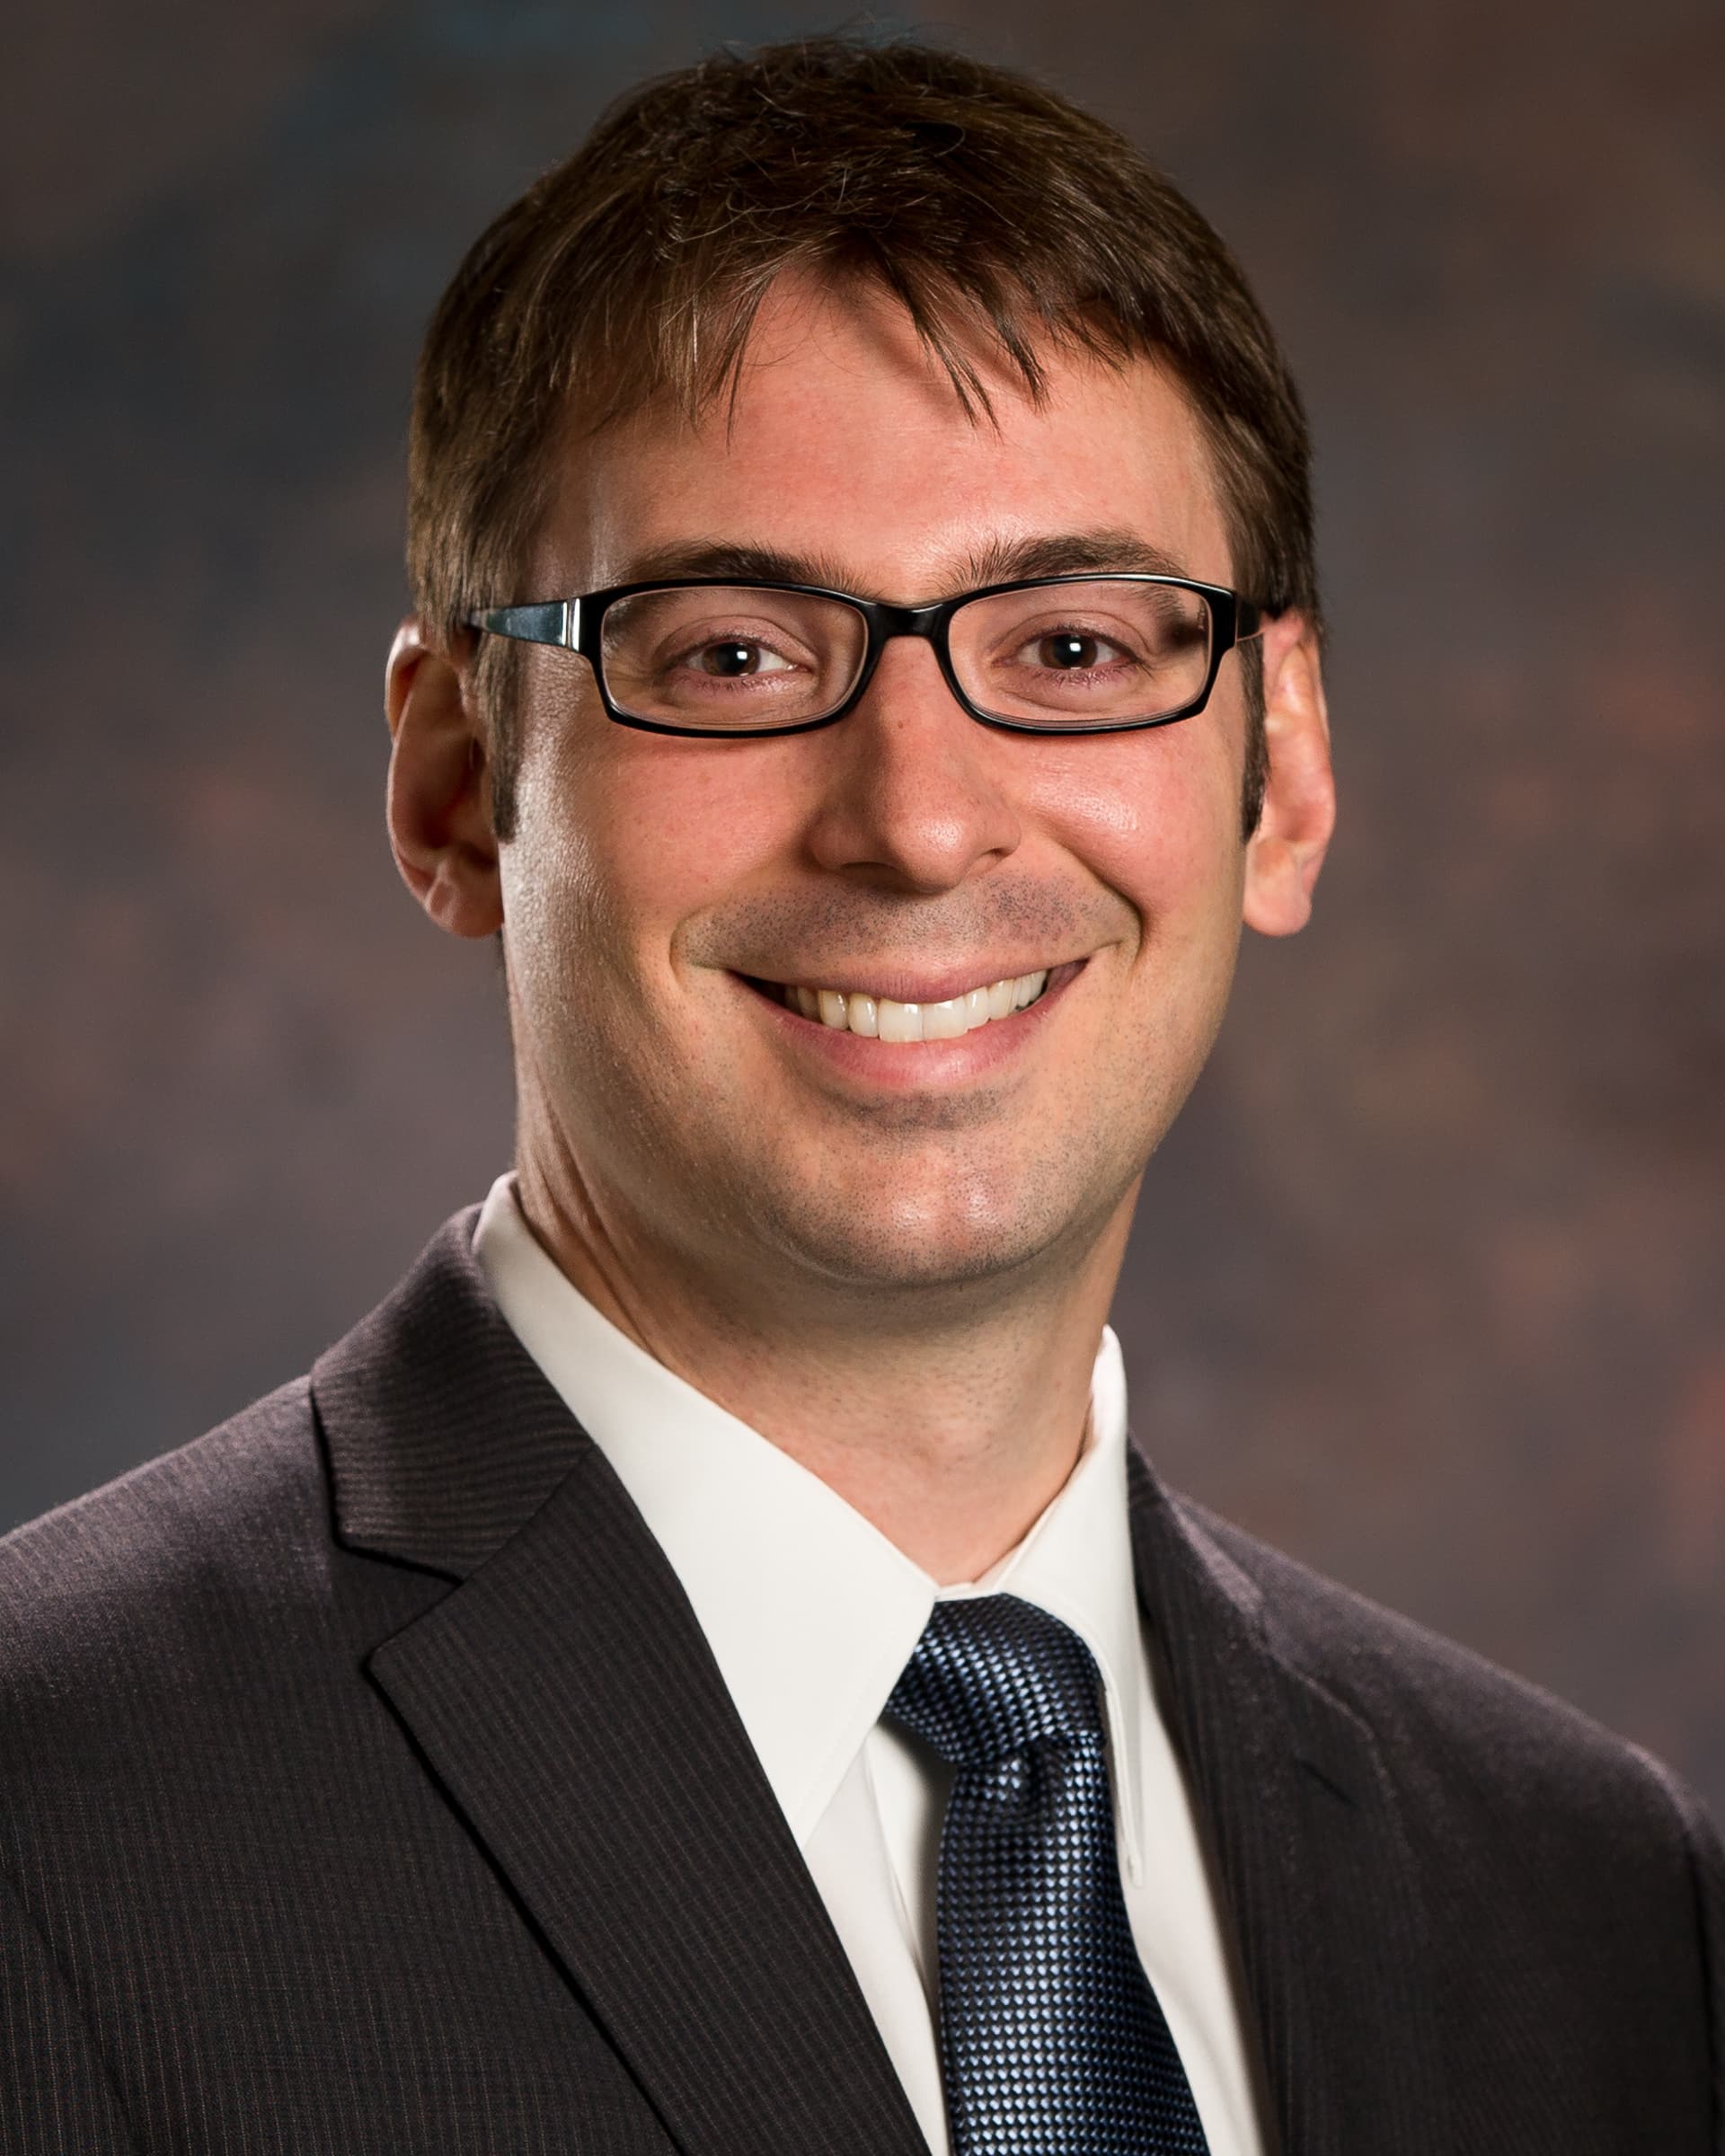 Photograph of Dr. Andrew Ducruet, a Phoenix-based neurosurgeon who specializes in vascular diseases of the brain and spine.